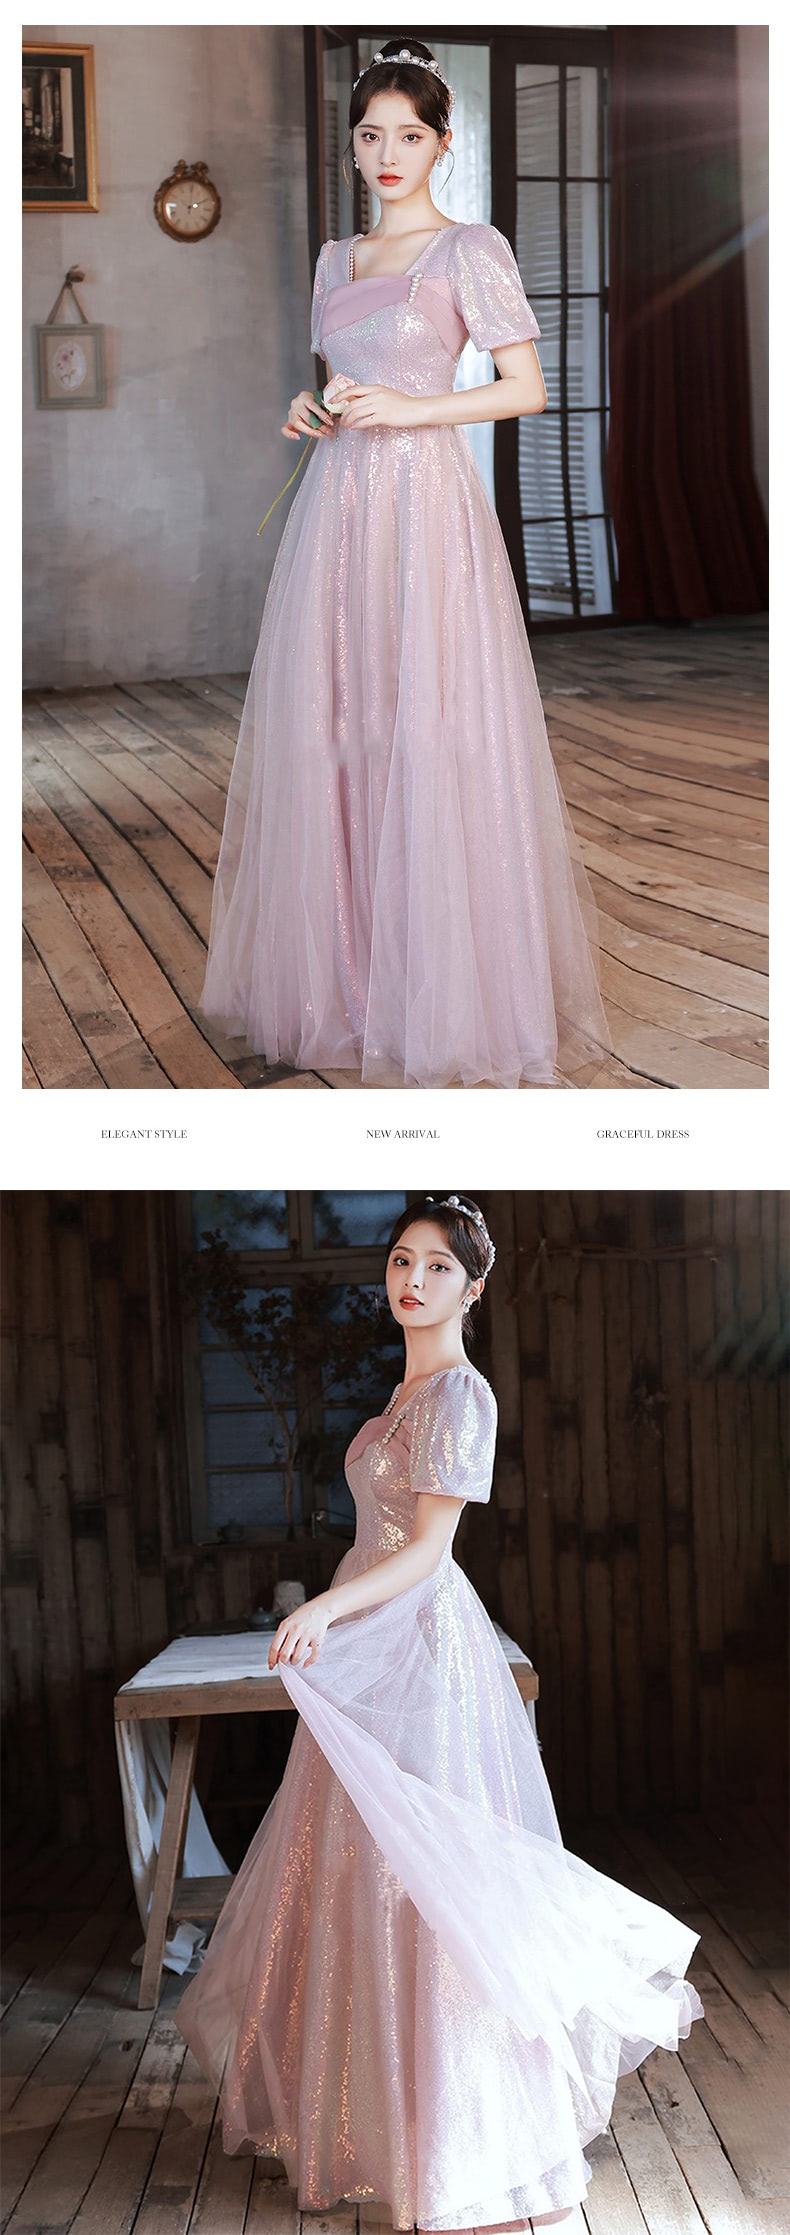 Fairy-Square-Neck-Pink-Princess-Prom-Evening-Party-Long-Dress15